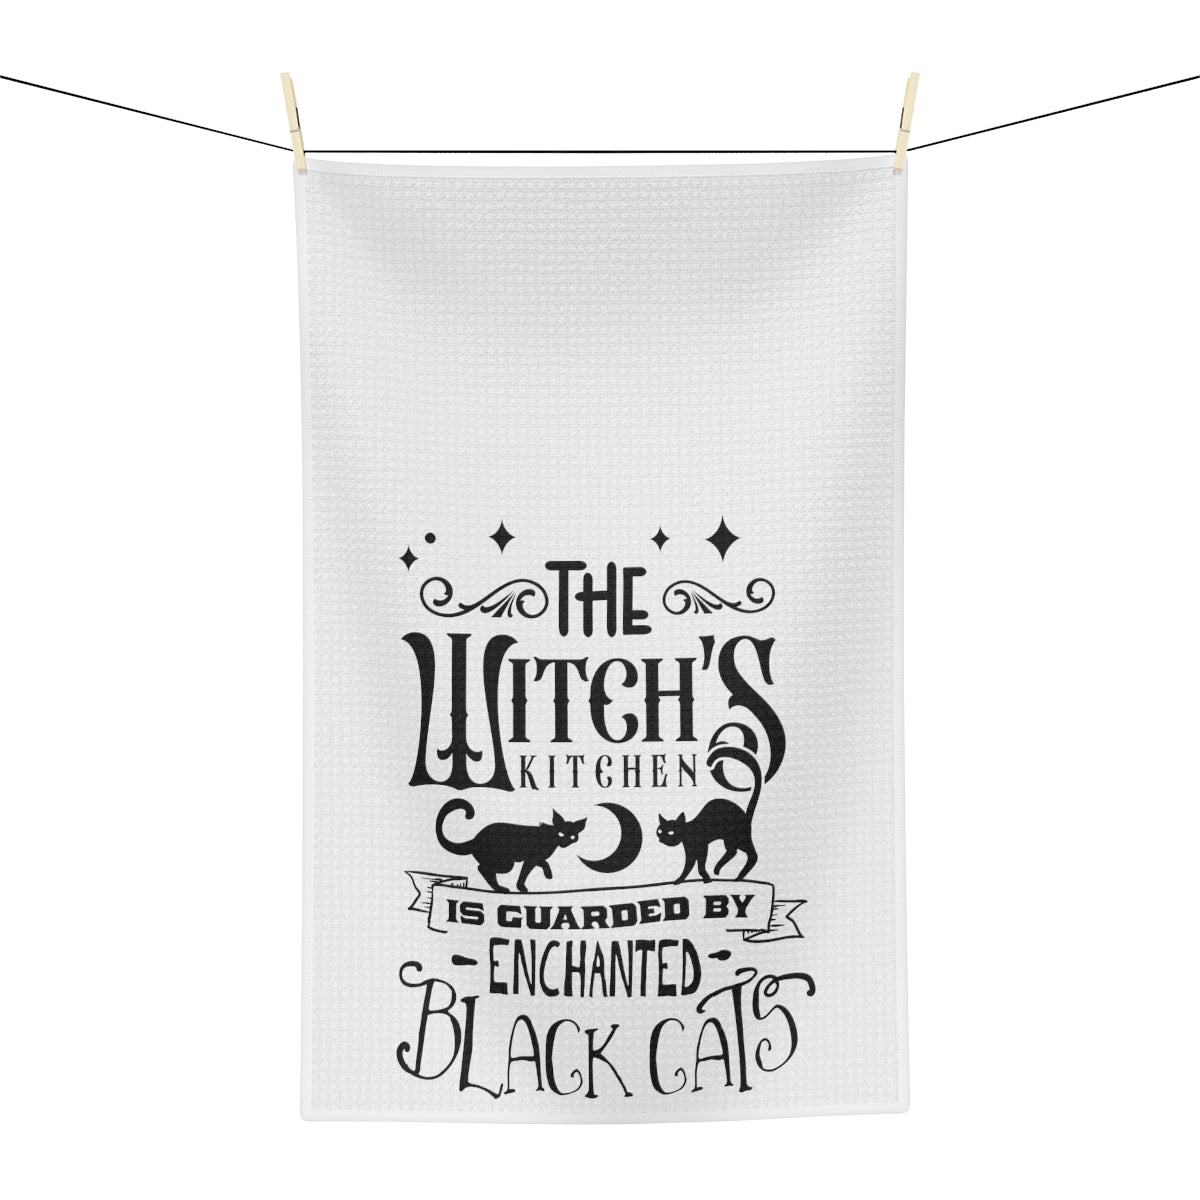 Enchanted Black Cats White Tea Towel - Witchy Kitchens